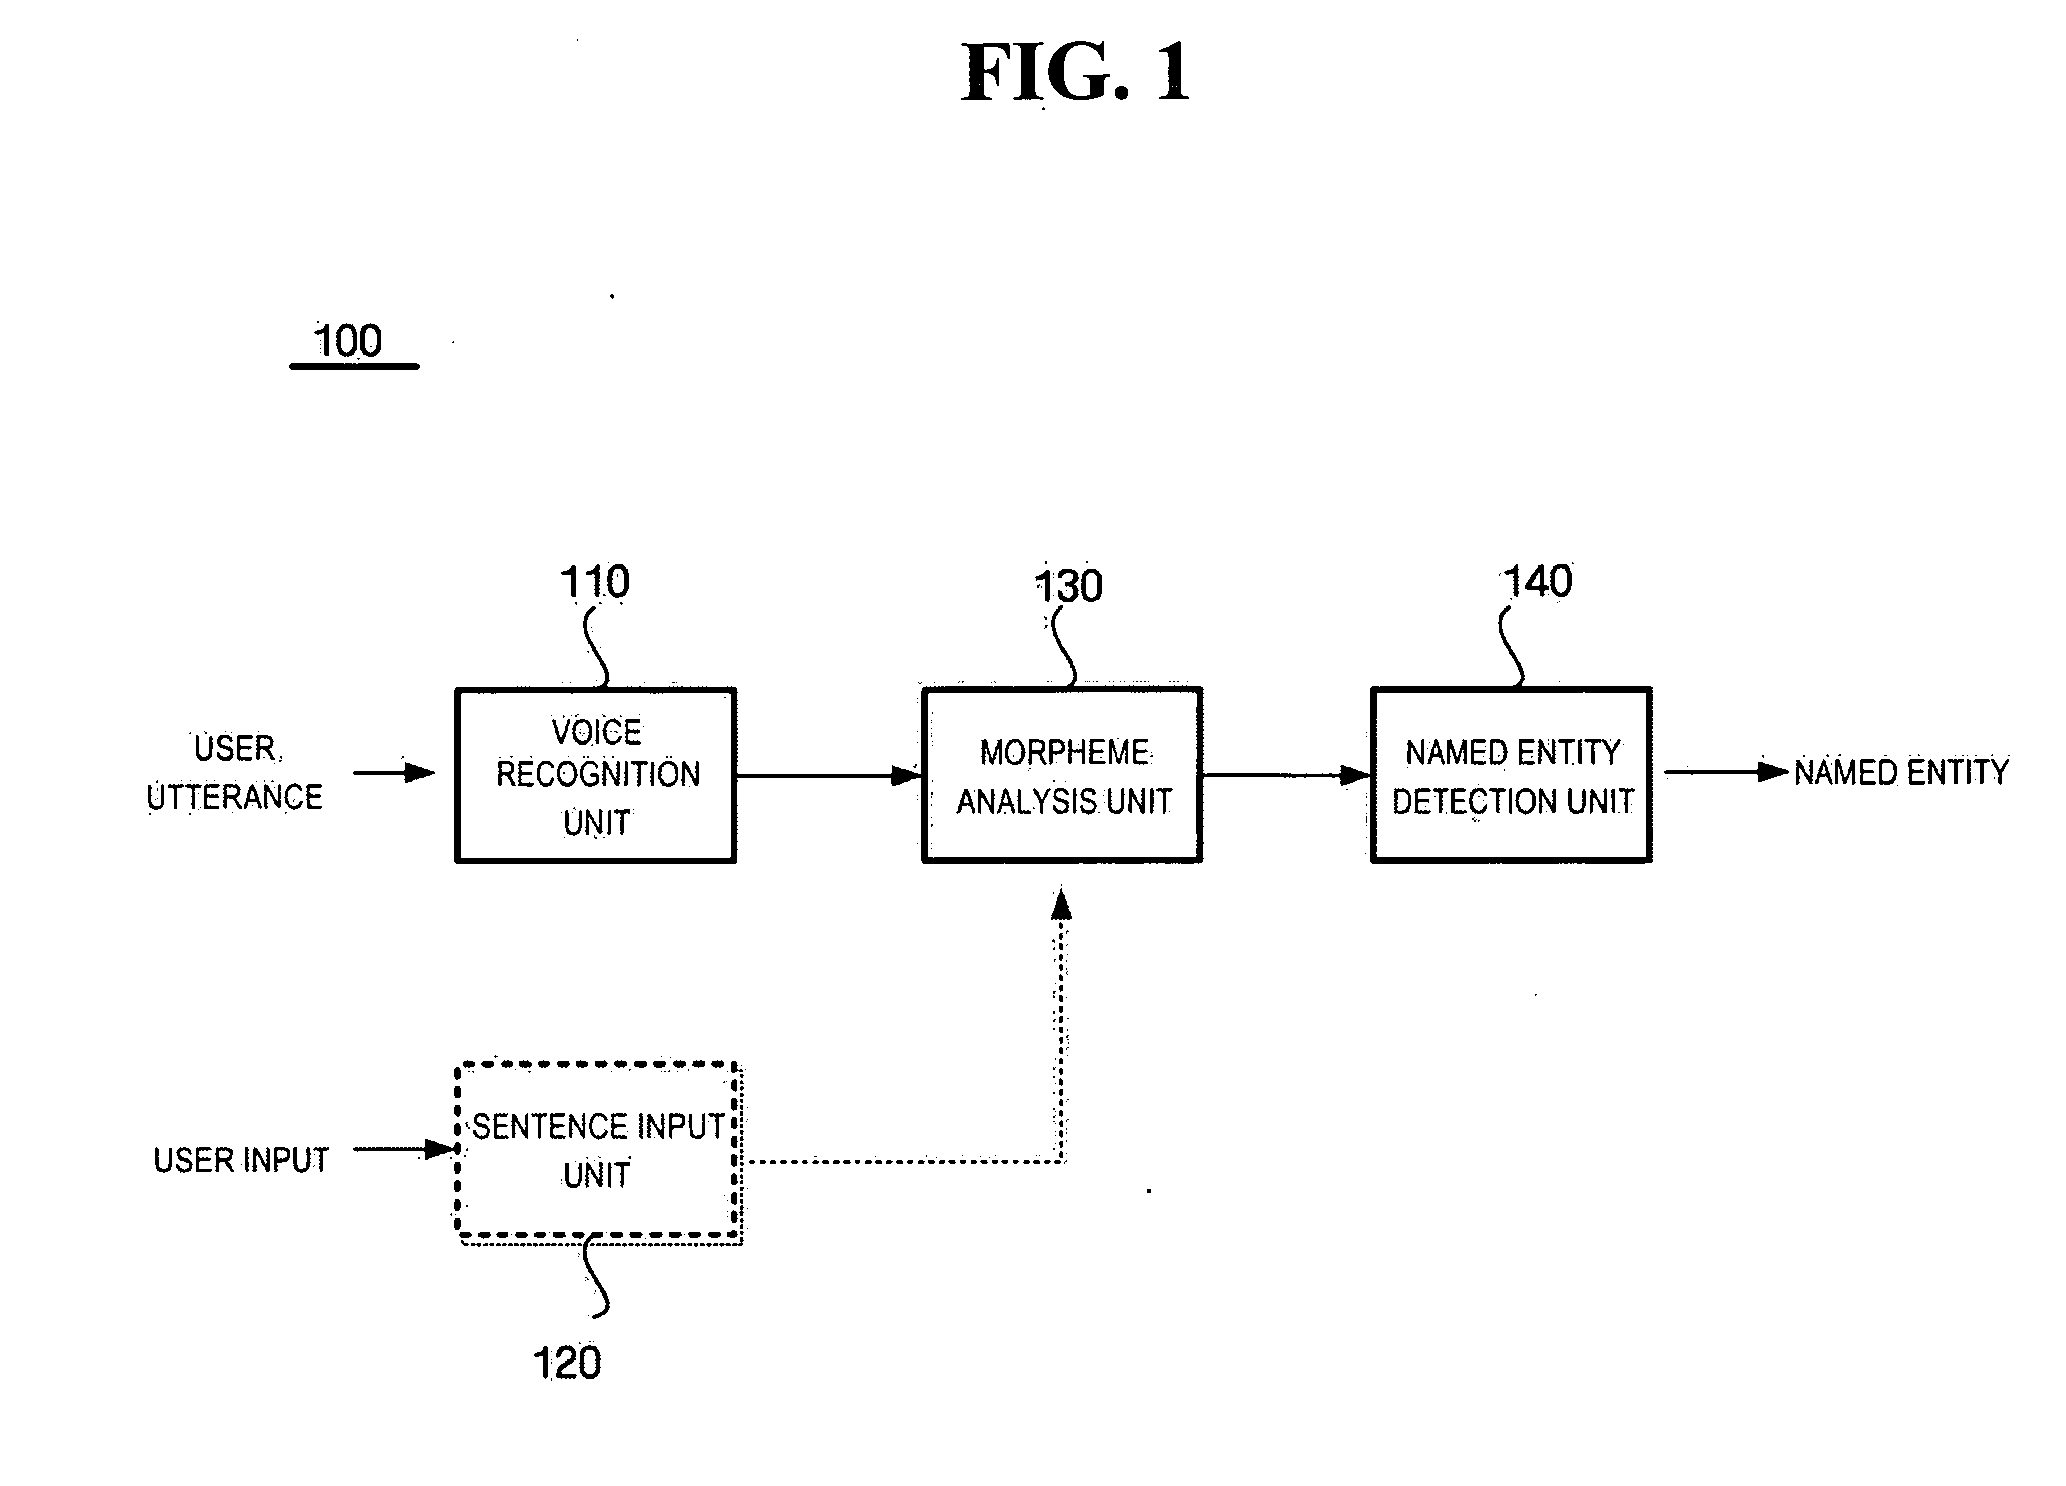 Apparatus and method for detecting named entity